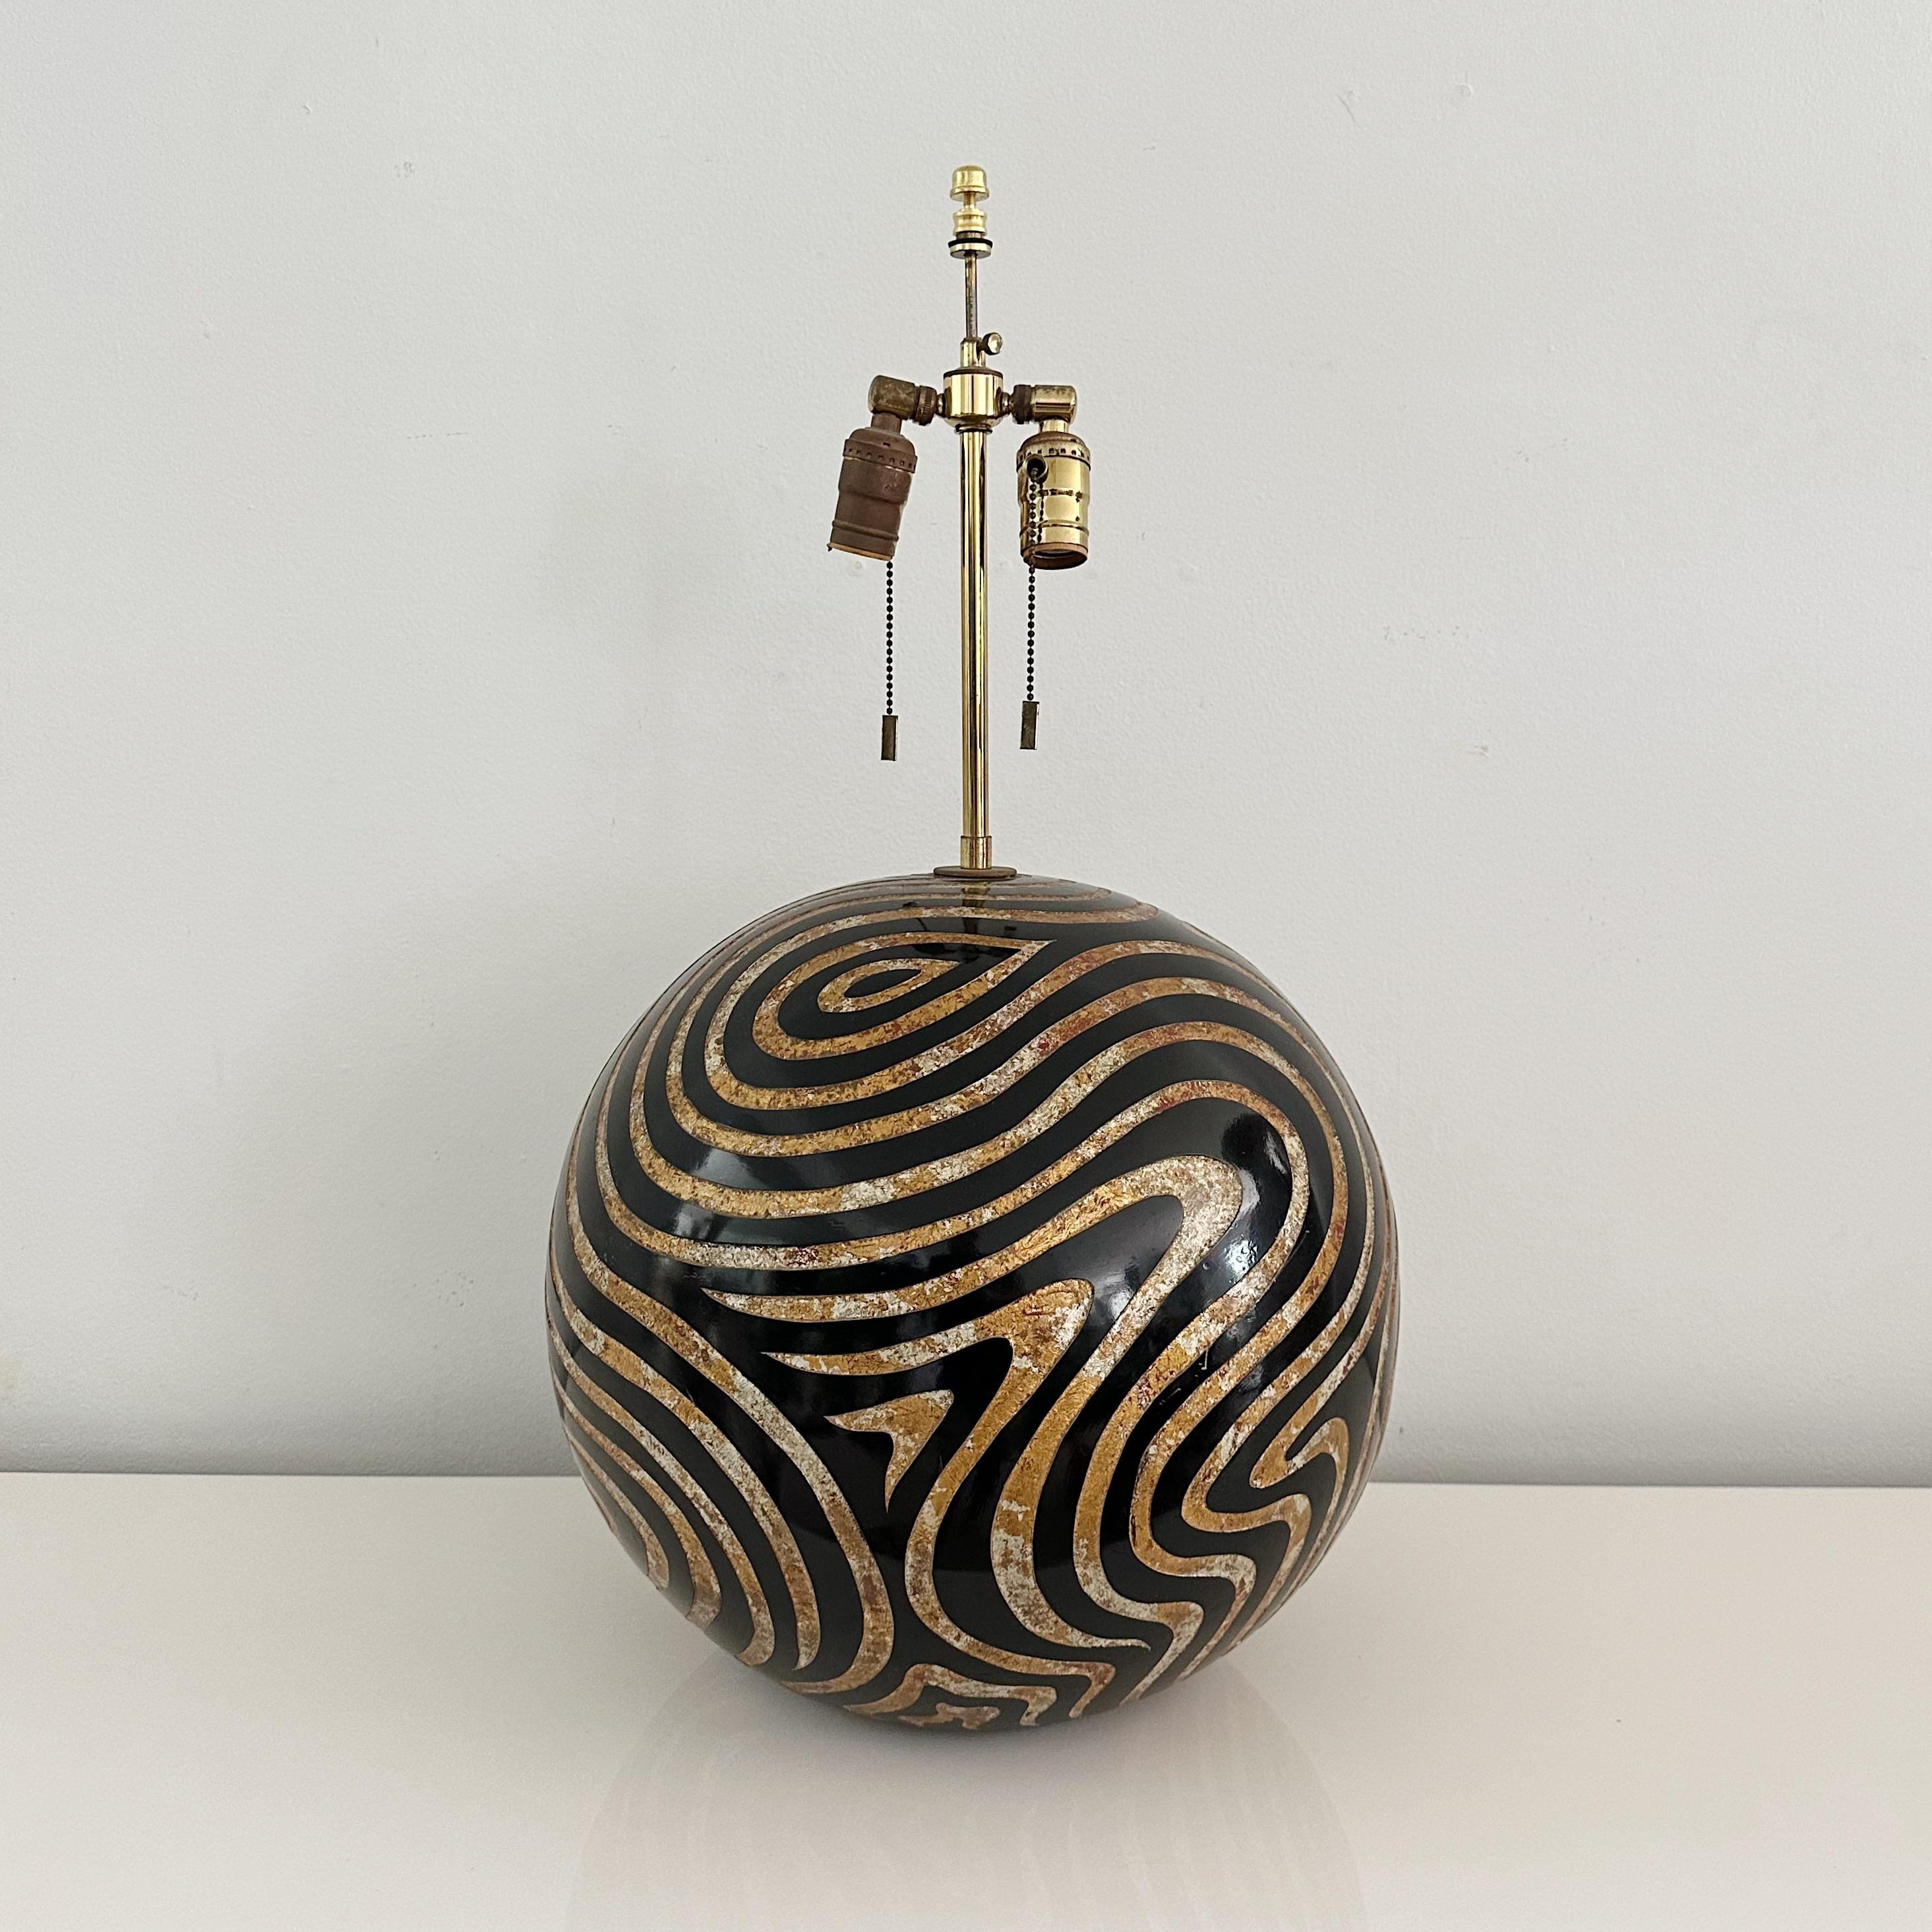 Vintage Karl Springer 1979 Gold & Silver Leaf Incised Black Wood Ball Table Lamp

This table lamp, designed by the renowned Karl Springer in 1979, is crafted with attention to detail and artistic finesse.

The lamp's central element is a beautifully